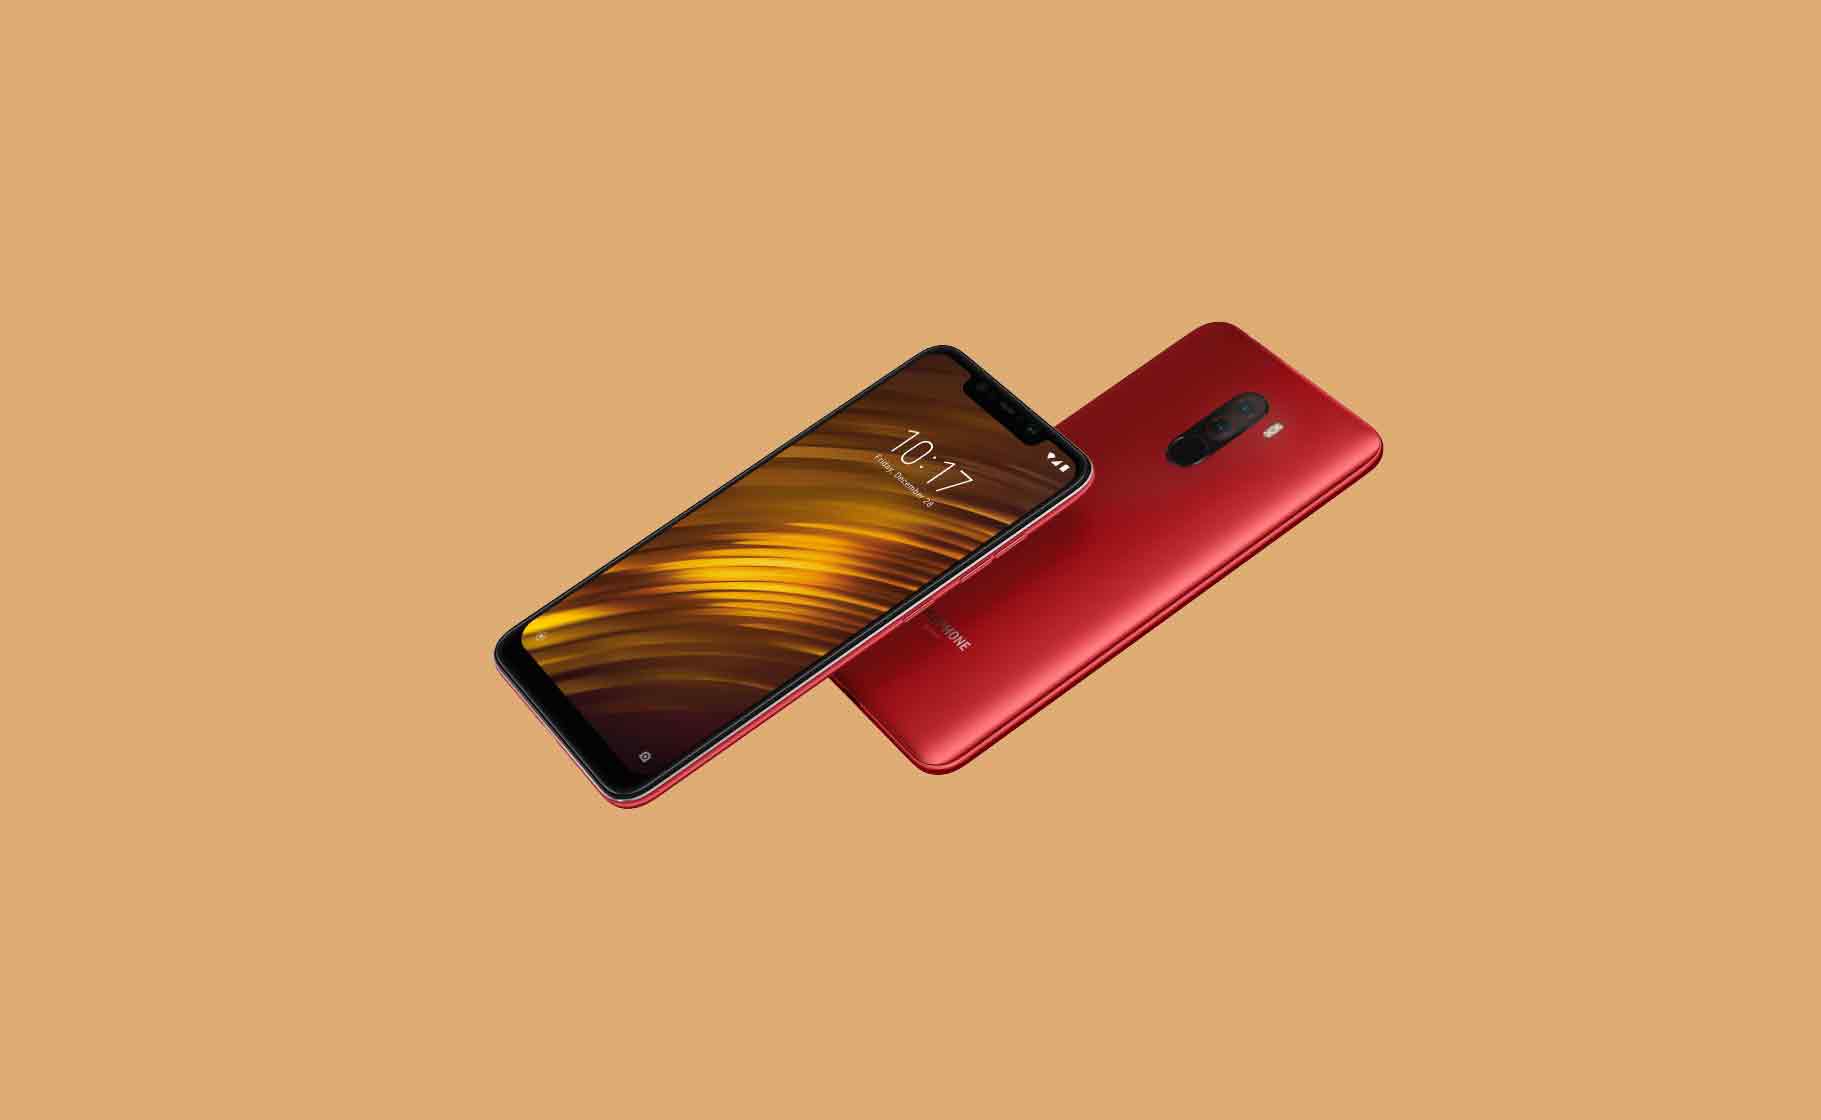 How to Perform Hard Reset or Factory Reset on Poco F1